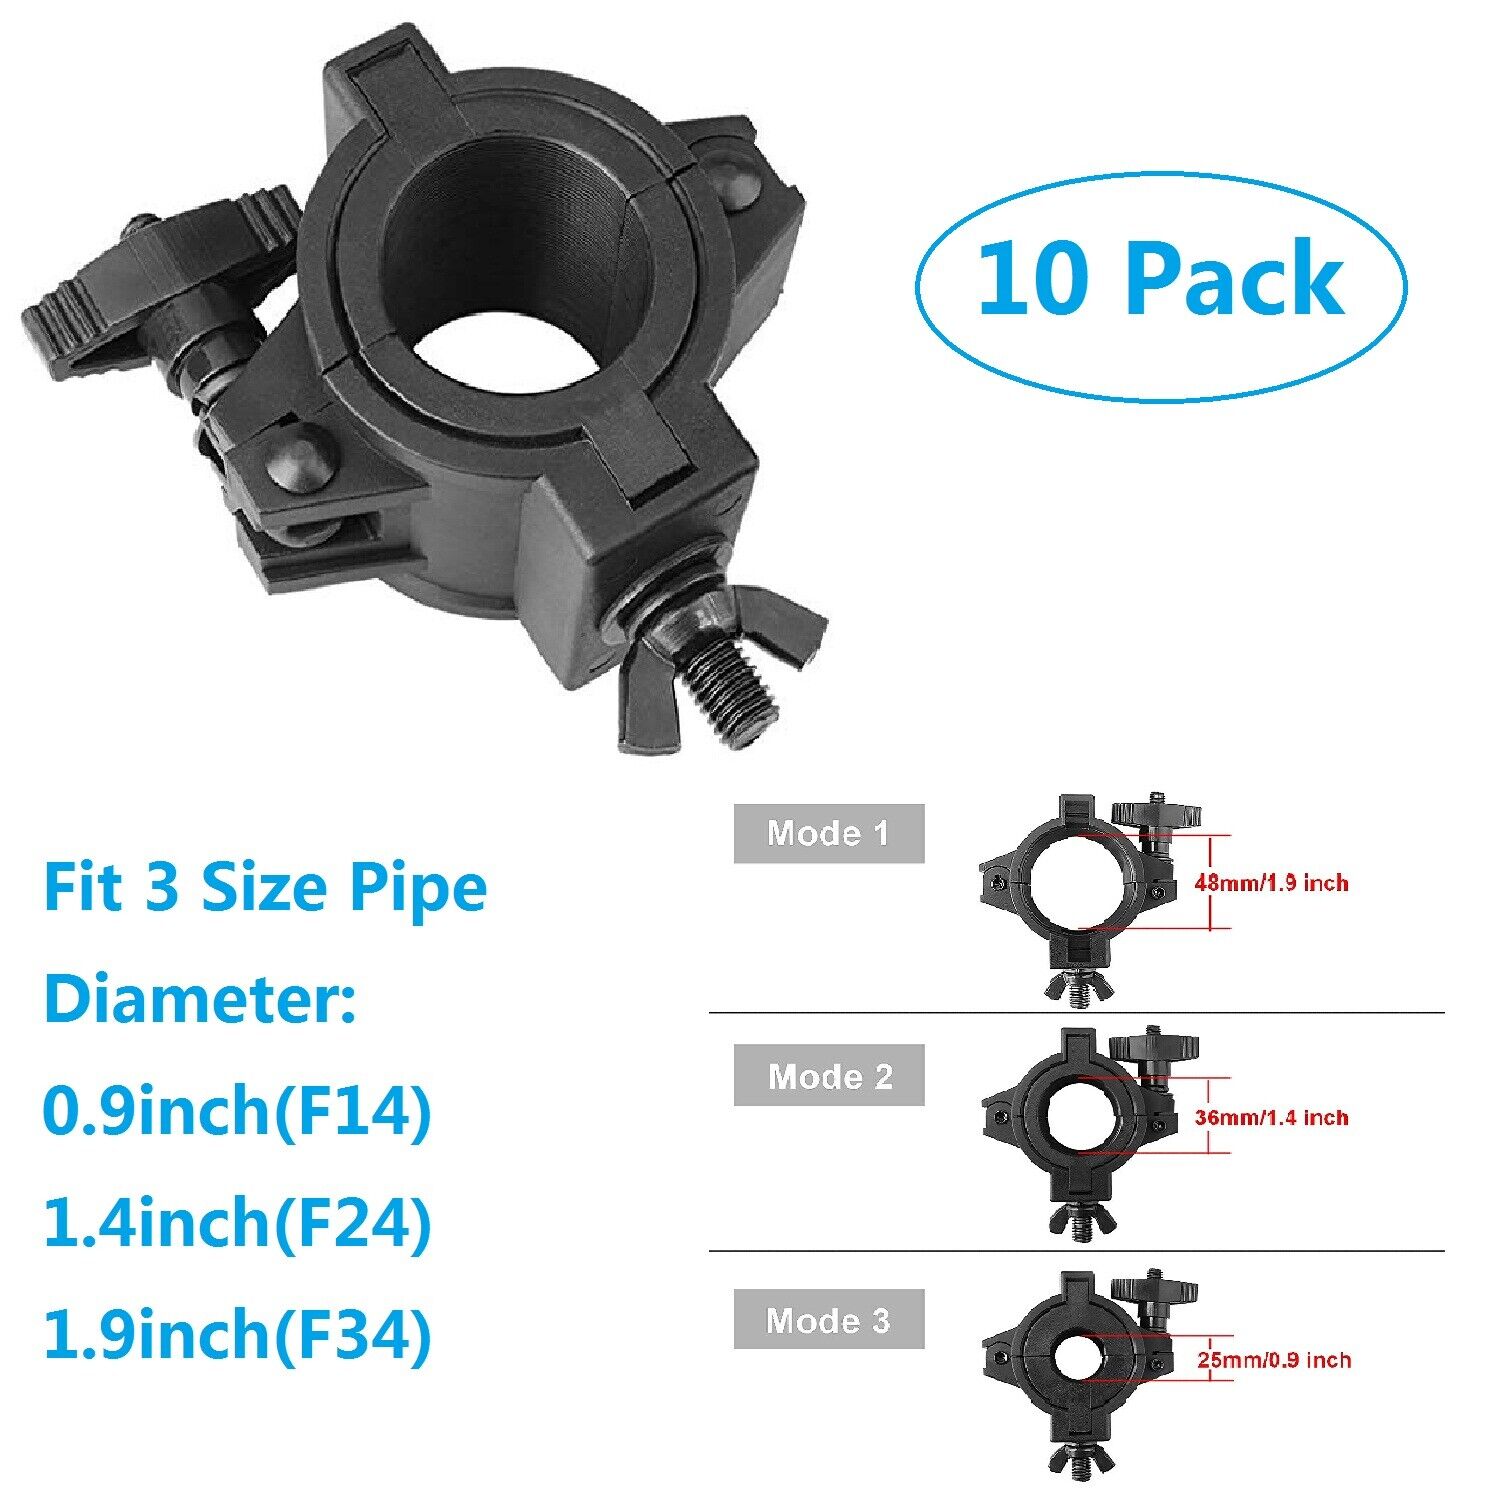 10 Pack Stage Light Clamp For Dj Lighting Duty 33lb O Clamp Fit 25mm,36mm,48mm